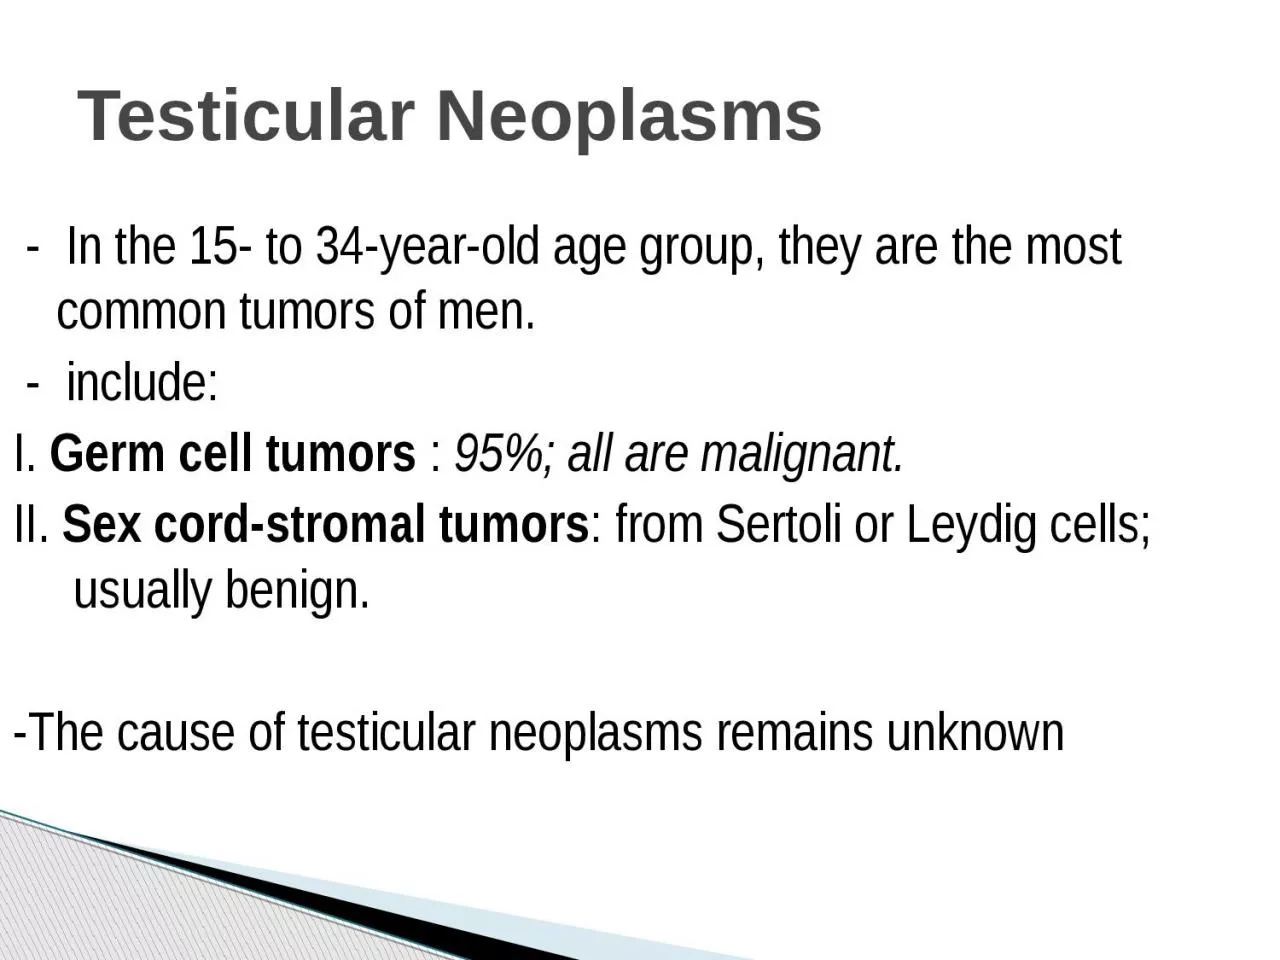 -  In the 15- to 34-year-old age group, they are the most common tumors of men.